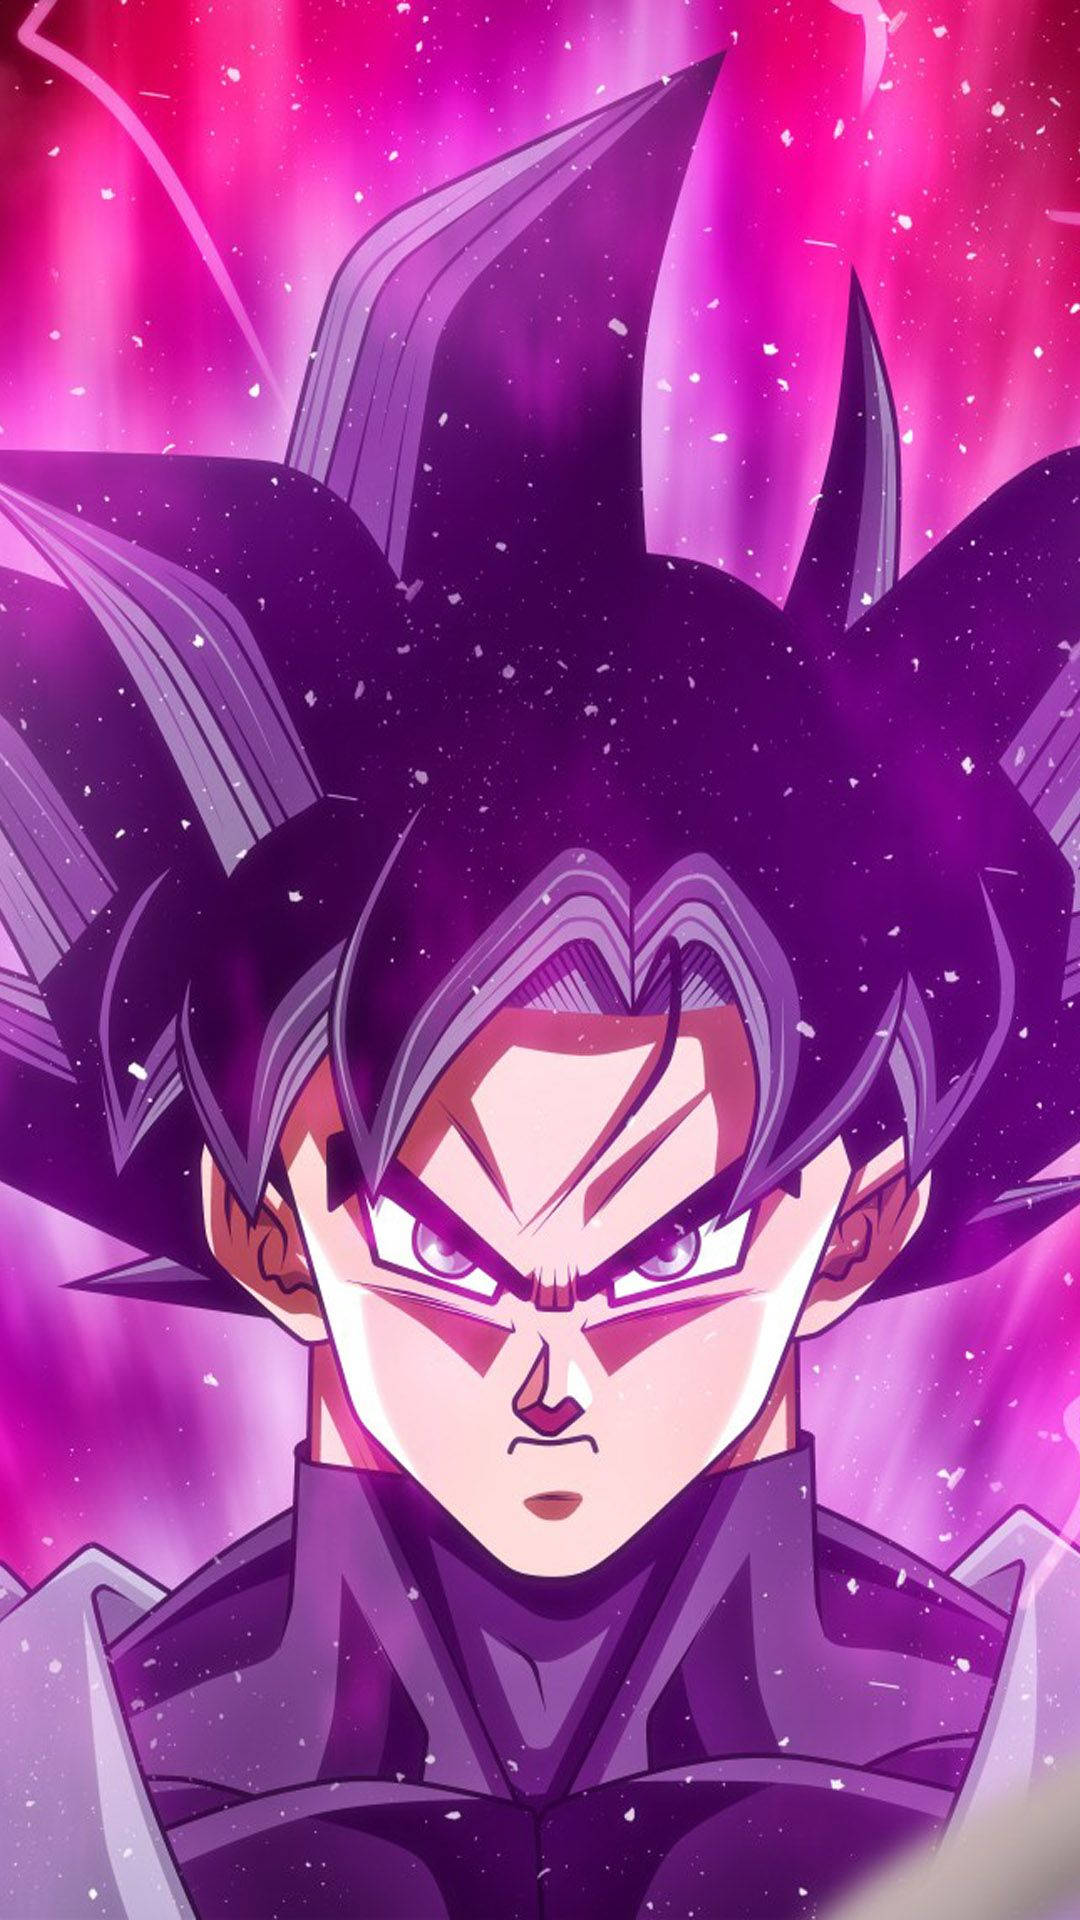 Goku, the Saiyan Warrior, rises to face a new challenge in the Dragon Ball Super series Wallpaper